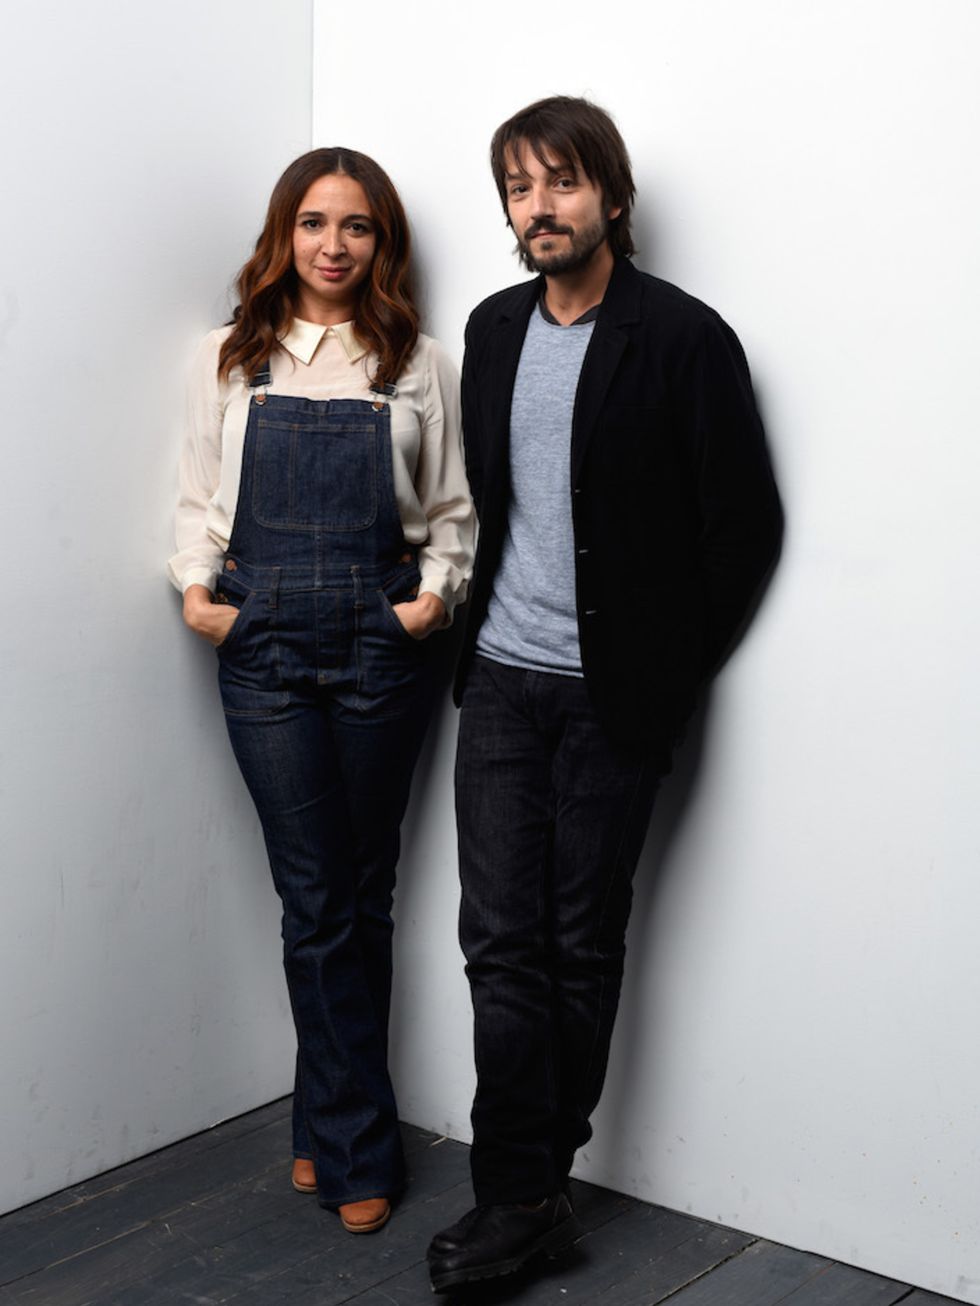 Actress Maya Rudolph posing for portraits at the Wireimage portrait studio looks fresh and feminine.